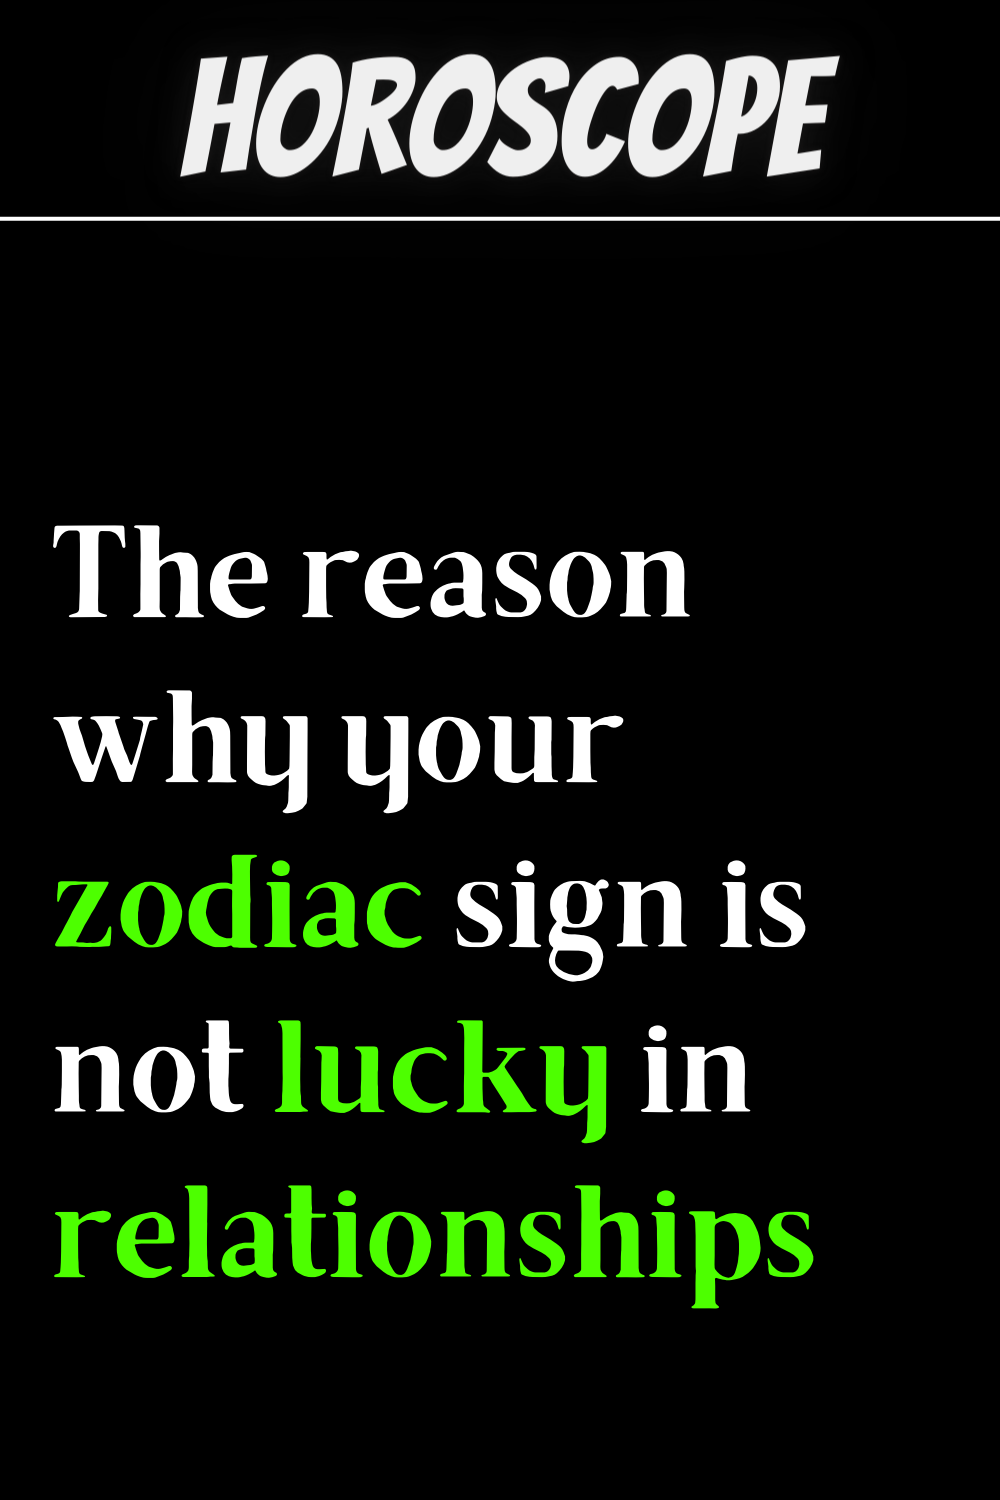 The reason why your zodiac sign is not lucky in relationships